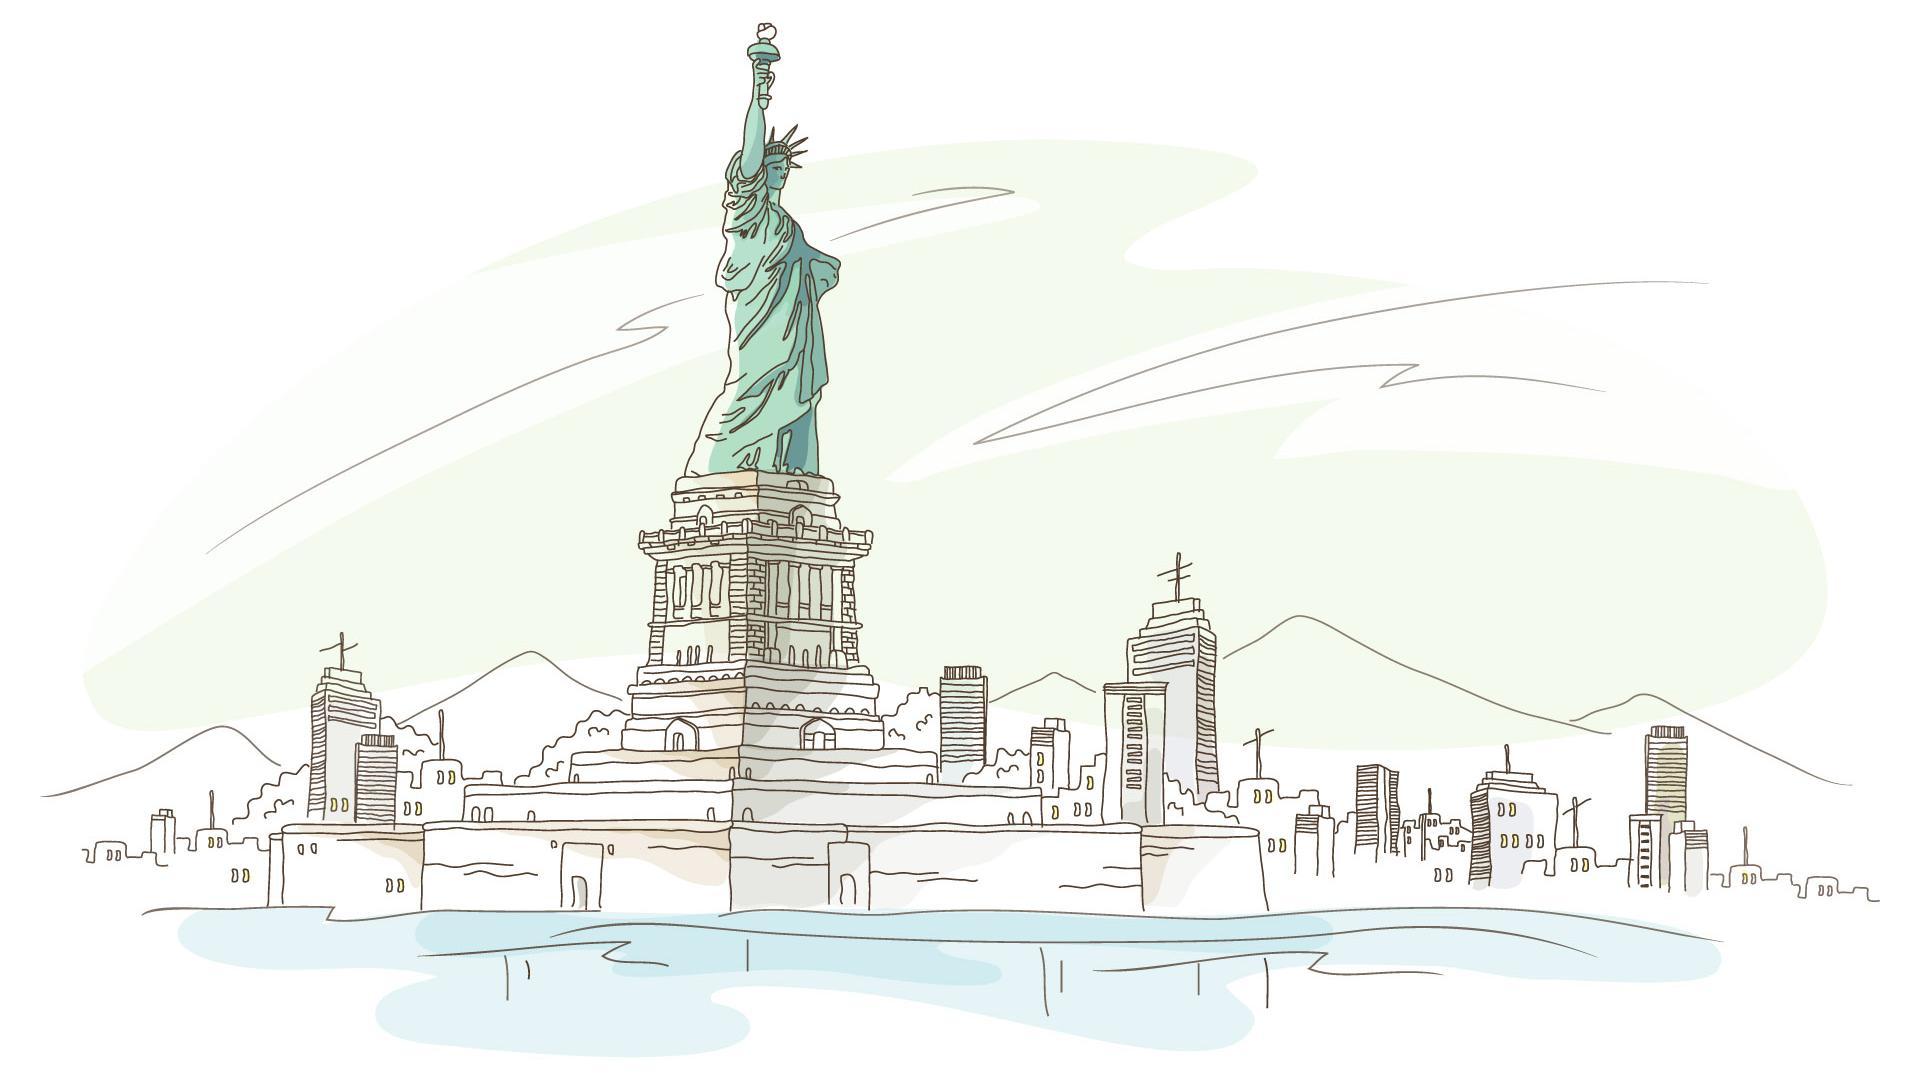 Statue of Liberty Wallpapers